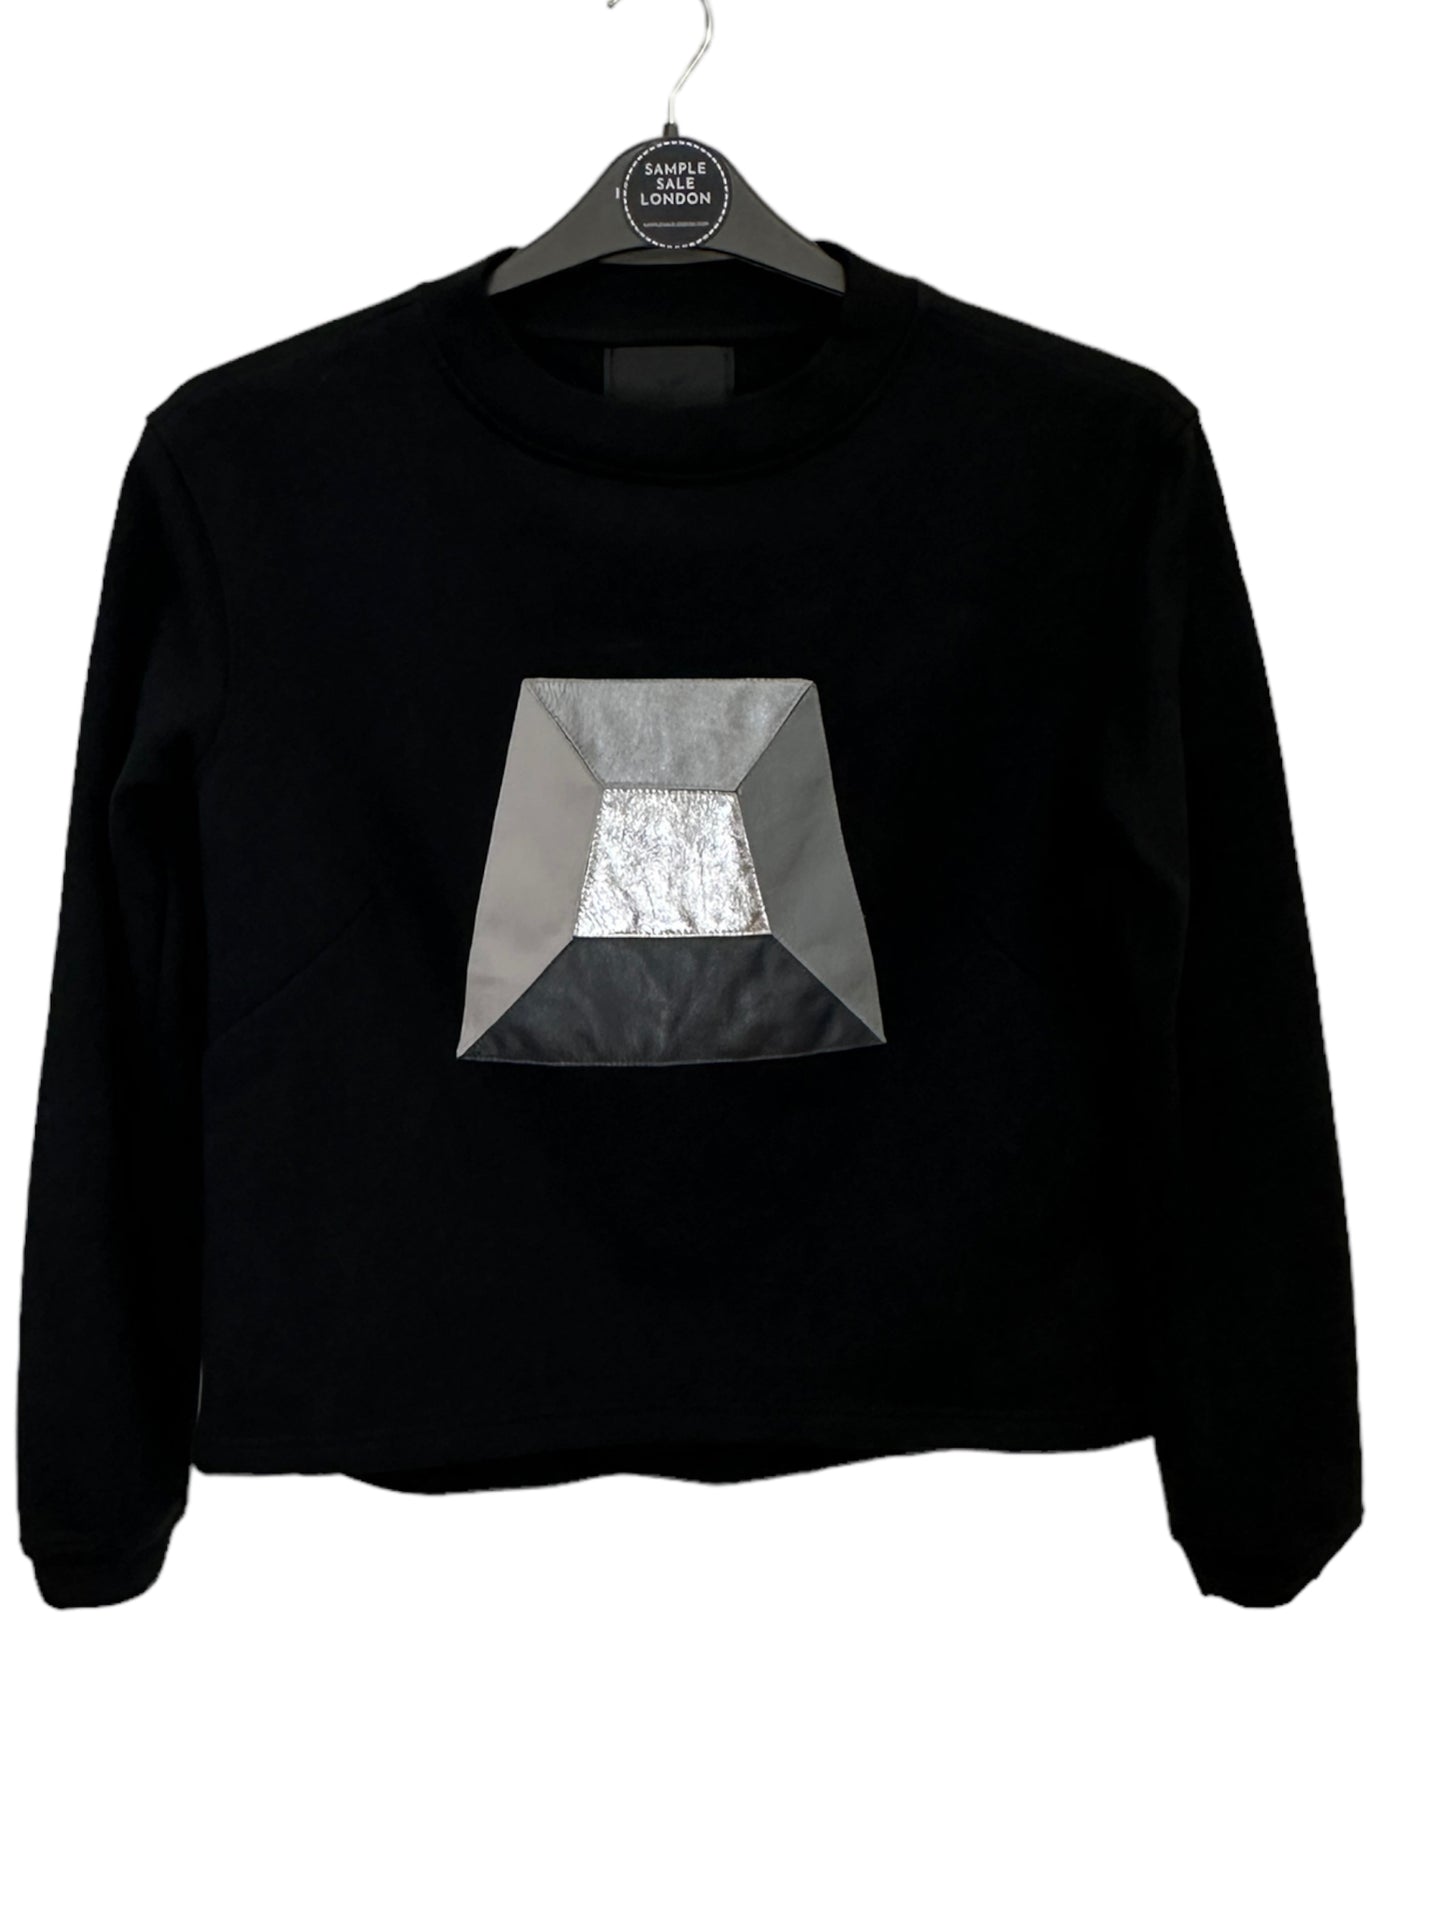 Pritch London -  Sweatshirt with leather details - Size S/M